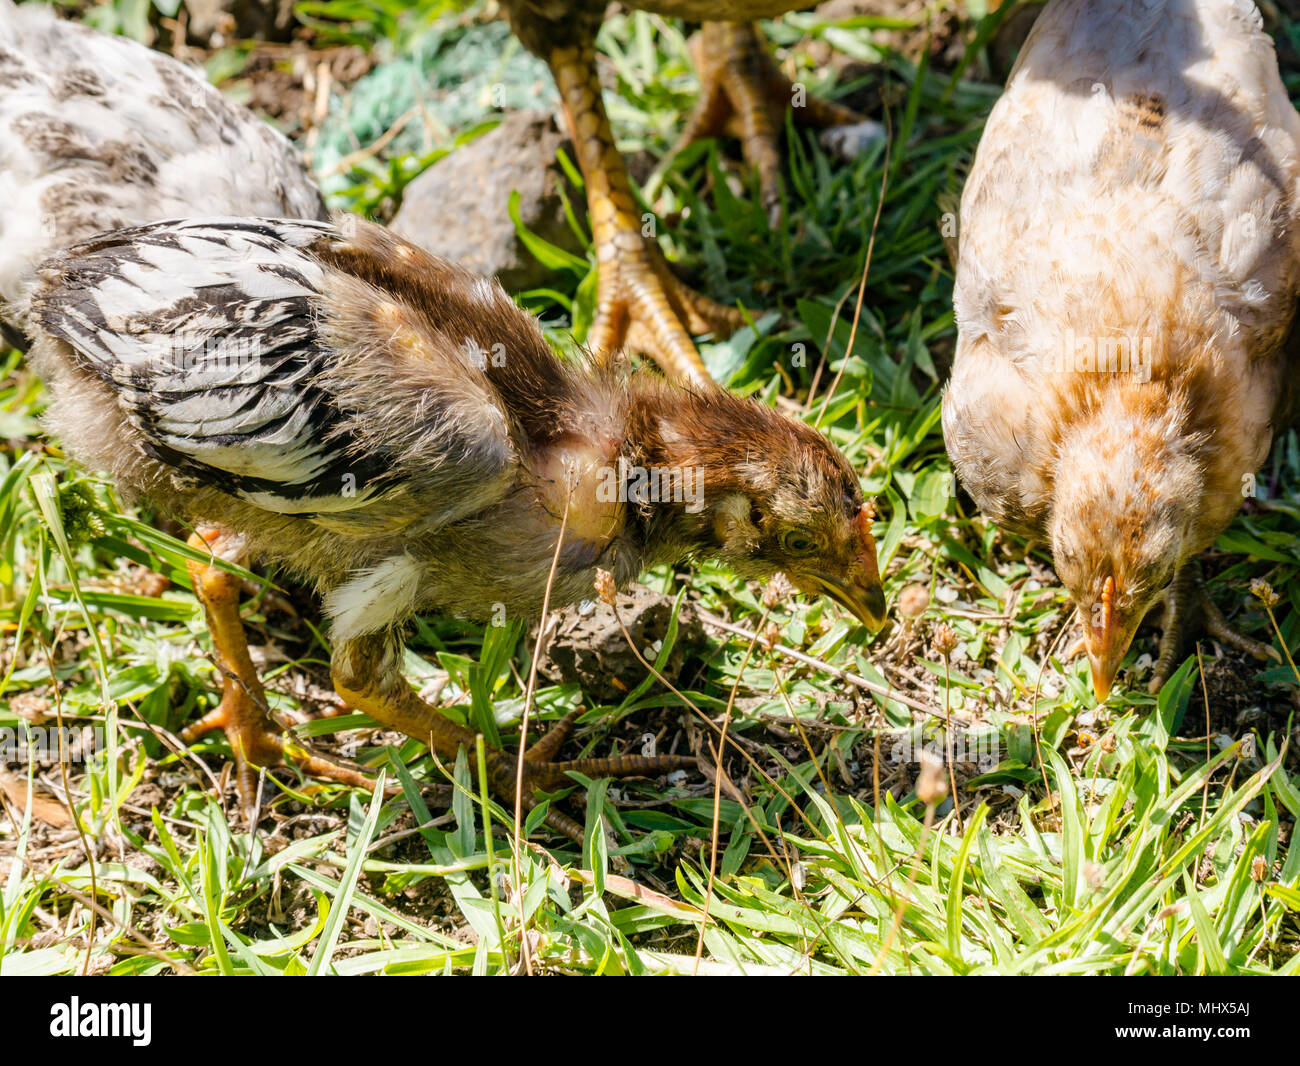 Domestic farmyard chicken, Easter Island, Chile. Close up of young chicks feeding in grass Stock Photo